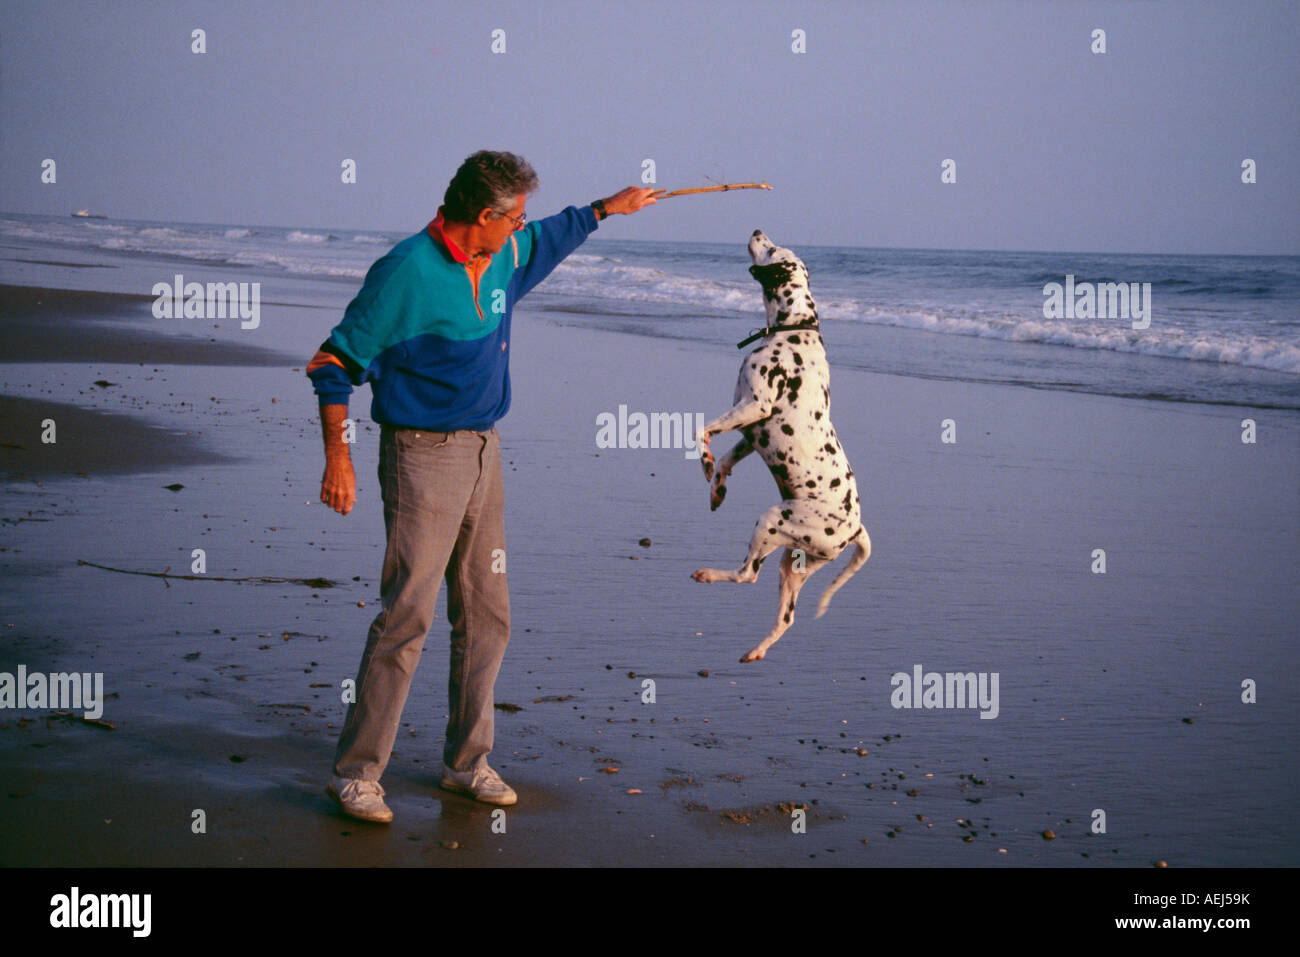 Mature adult man dog owner wearing colorful sweatshirt playing with jumping jumps jump high Dalmatian dog beach POV  MR Myrleen Pearson Stock Photo